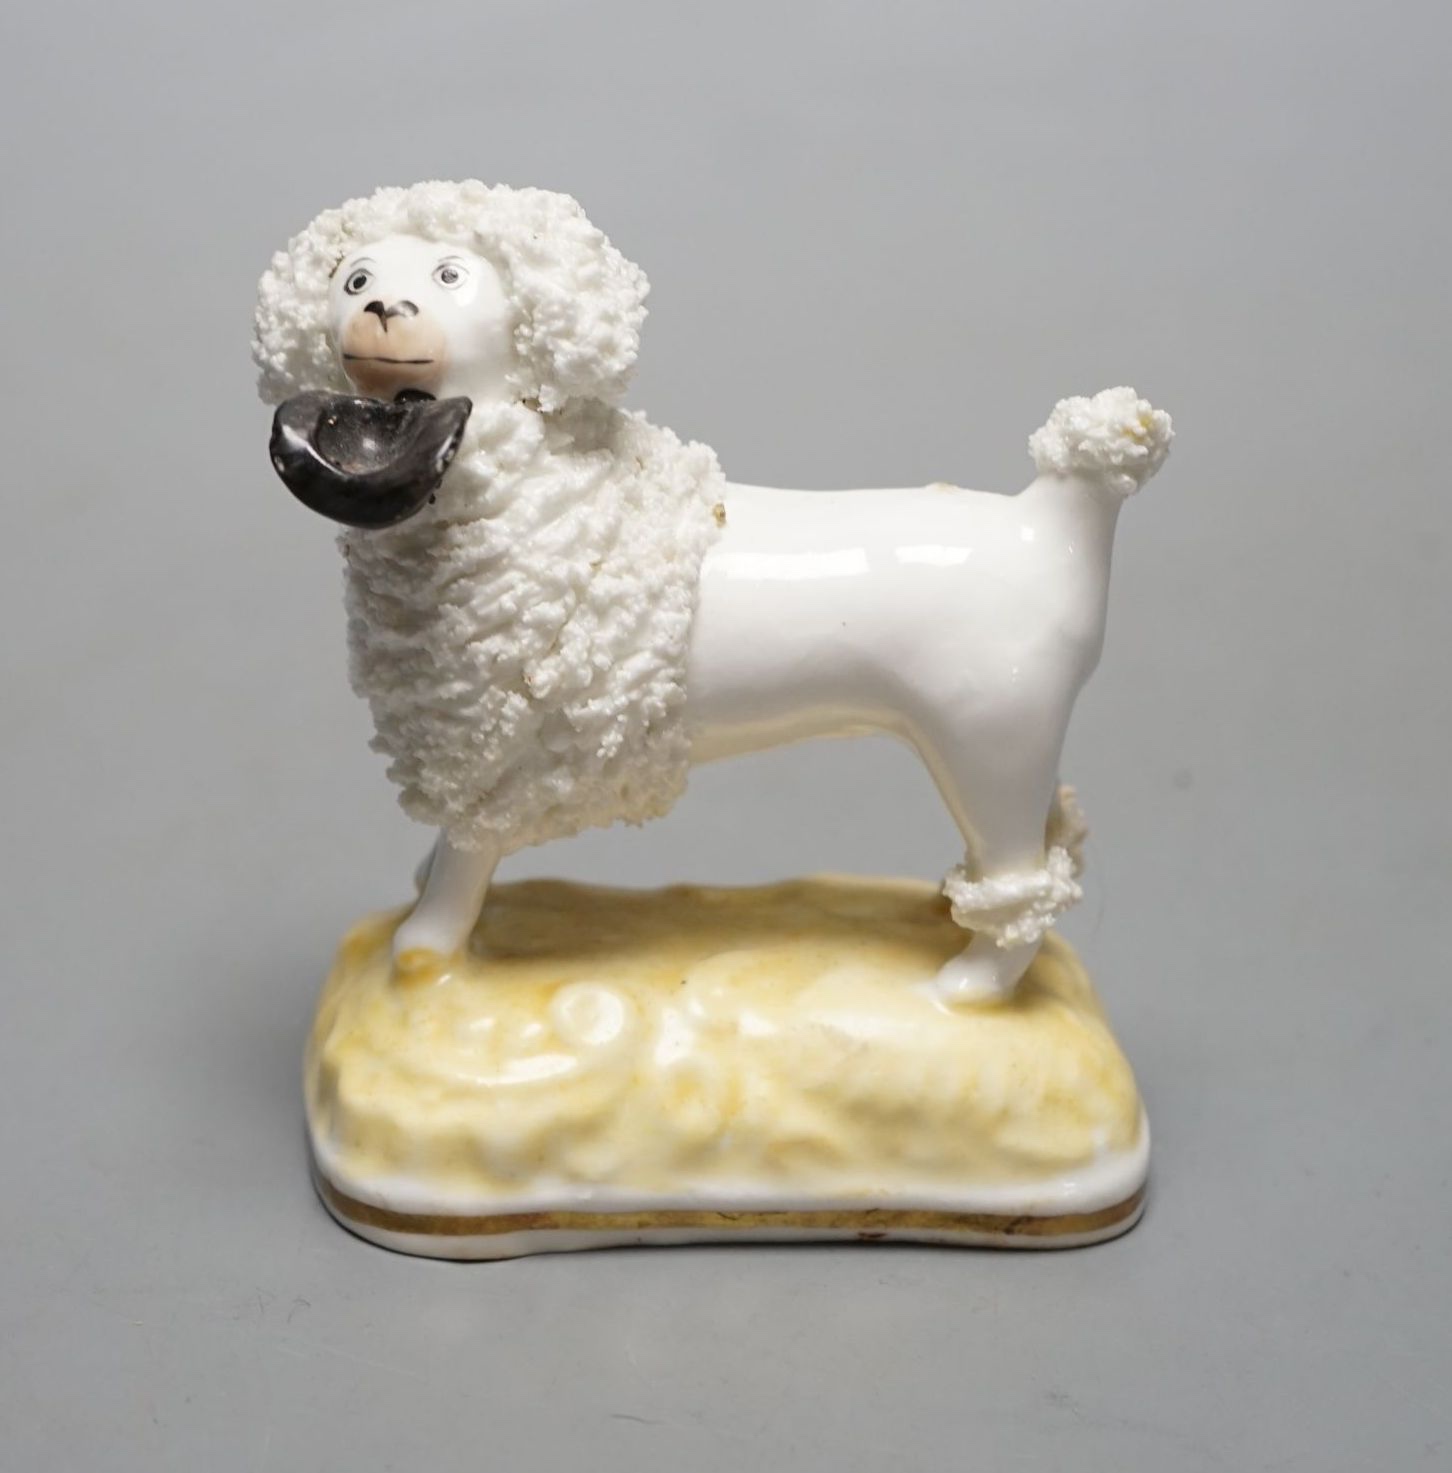 A rare Samuel Alcock porcelain figure of a standing poodle holding a hat in its mouth, c.1835-50, impressed ‘17’, Provenance: Dennis G. Rice collection, apparently an unrecorded model when Dr Rice published his book., 8.